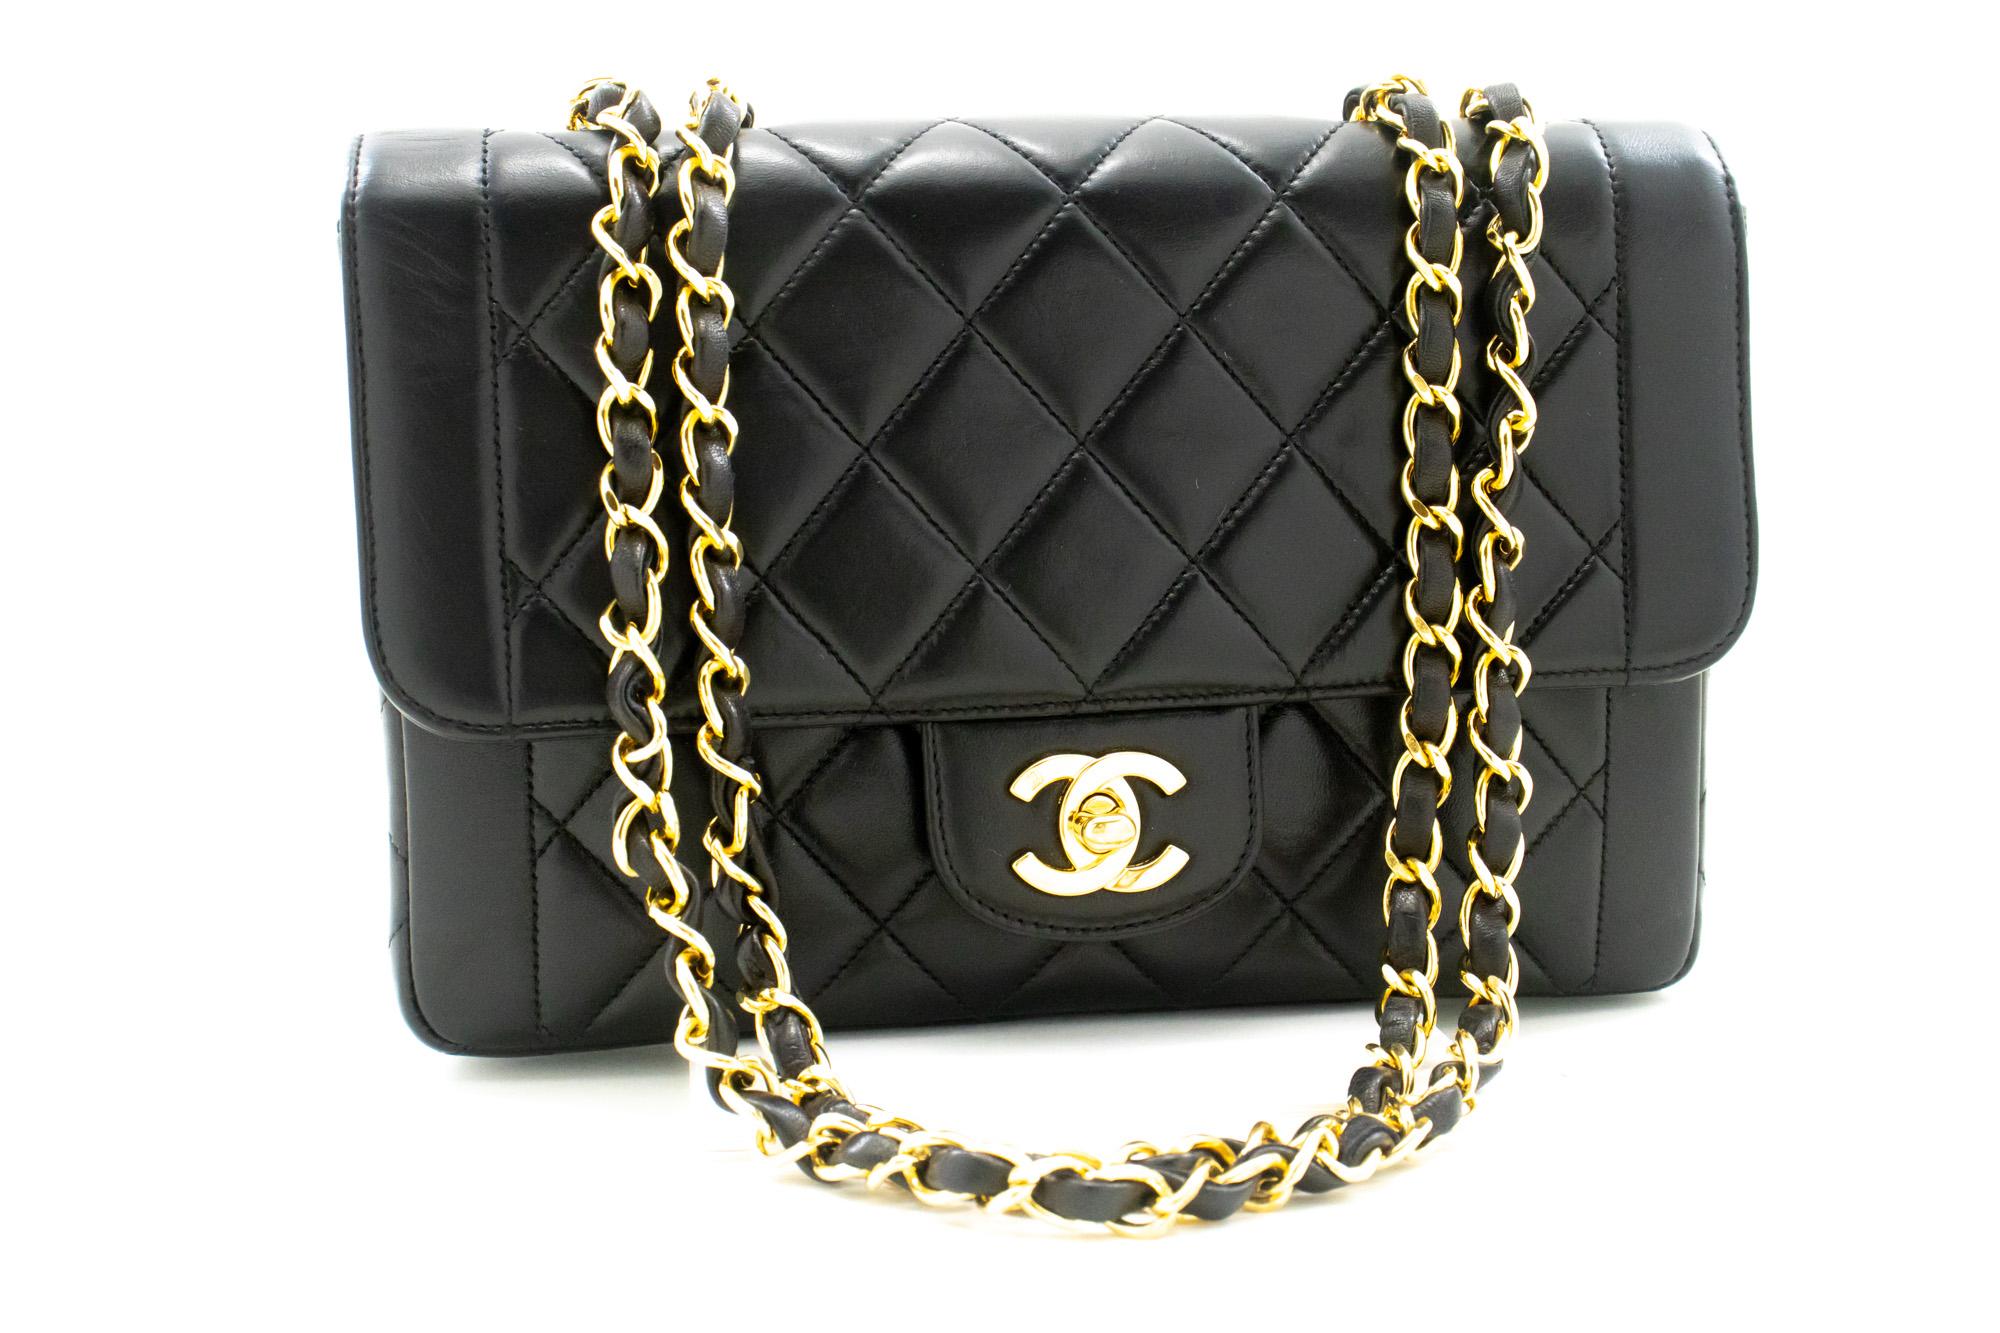 An authentic CHANEL Single Flap Chain Shoulder Bag Black Quilted made of black Lambskin Purse. The color is Black. The outside material is Leather. The pattern is Solid. This item is Vintage / Classic. The year of manufacture would be